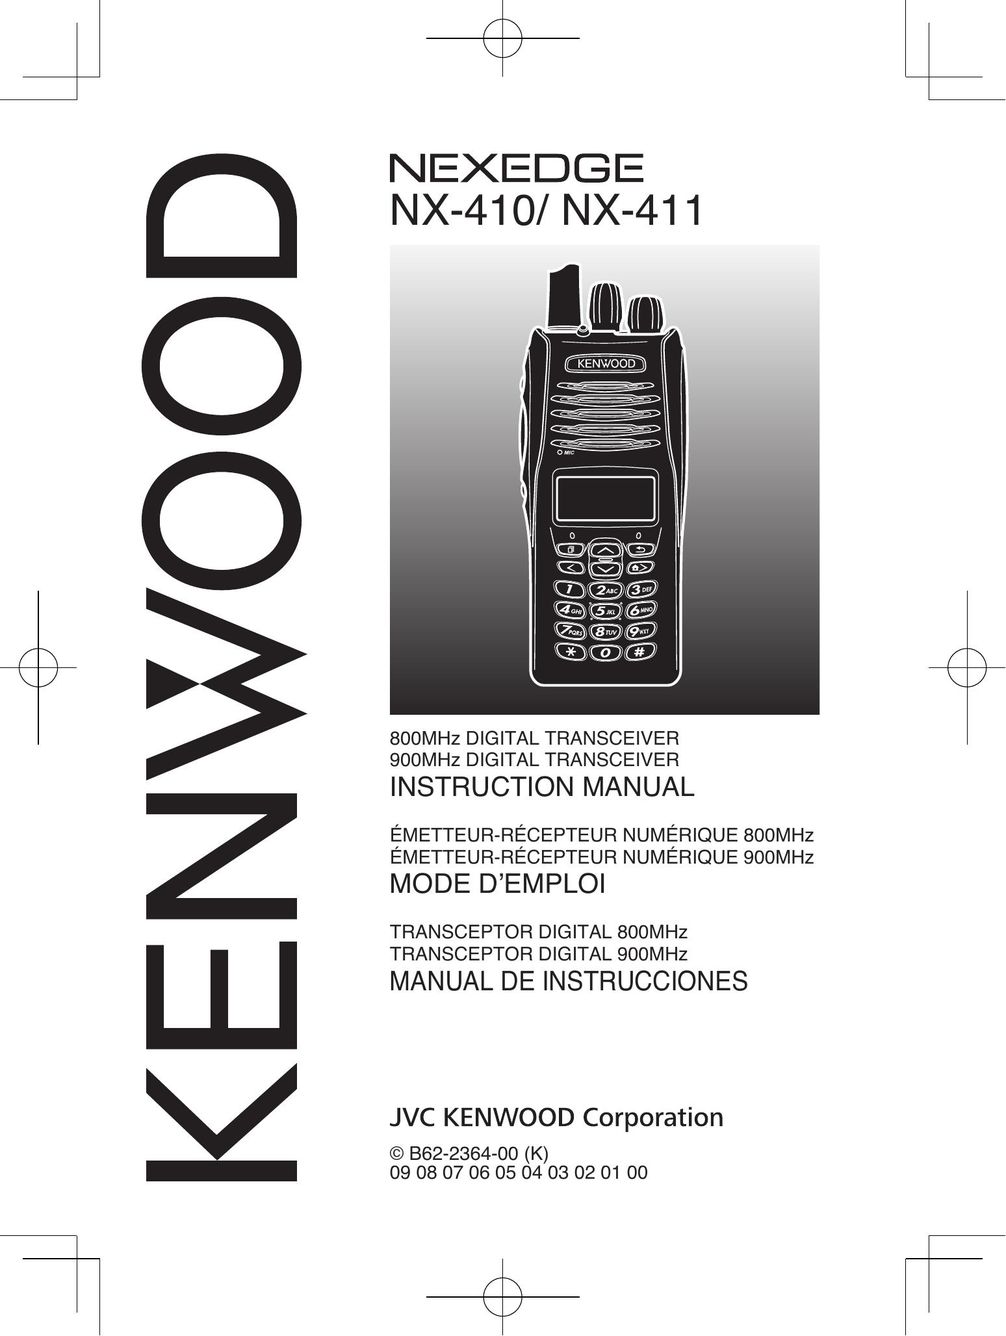 Kenwood NX-411 Home Security System User Manual